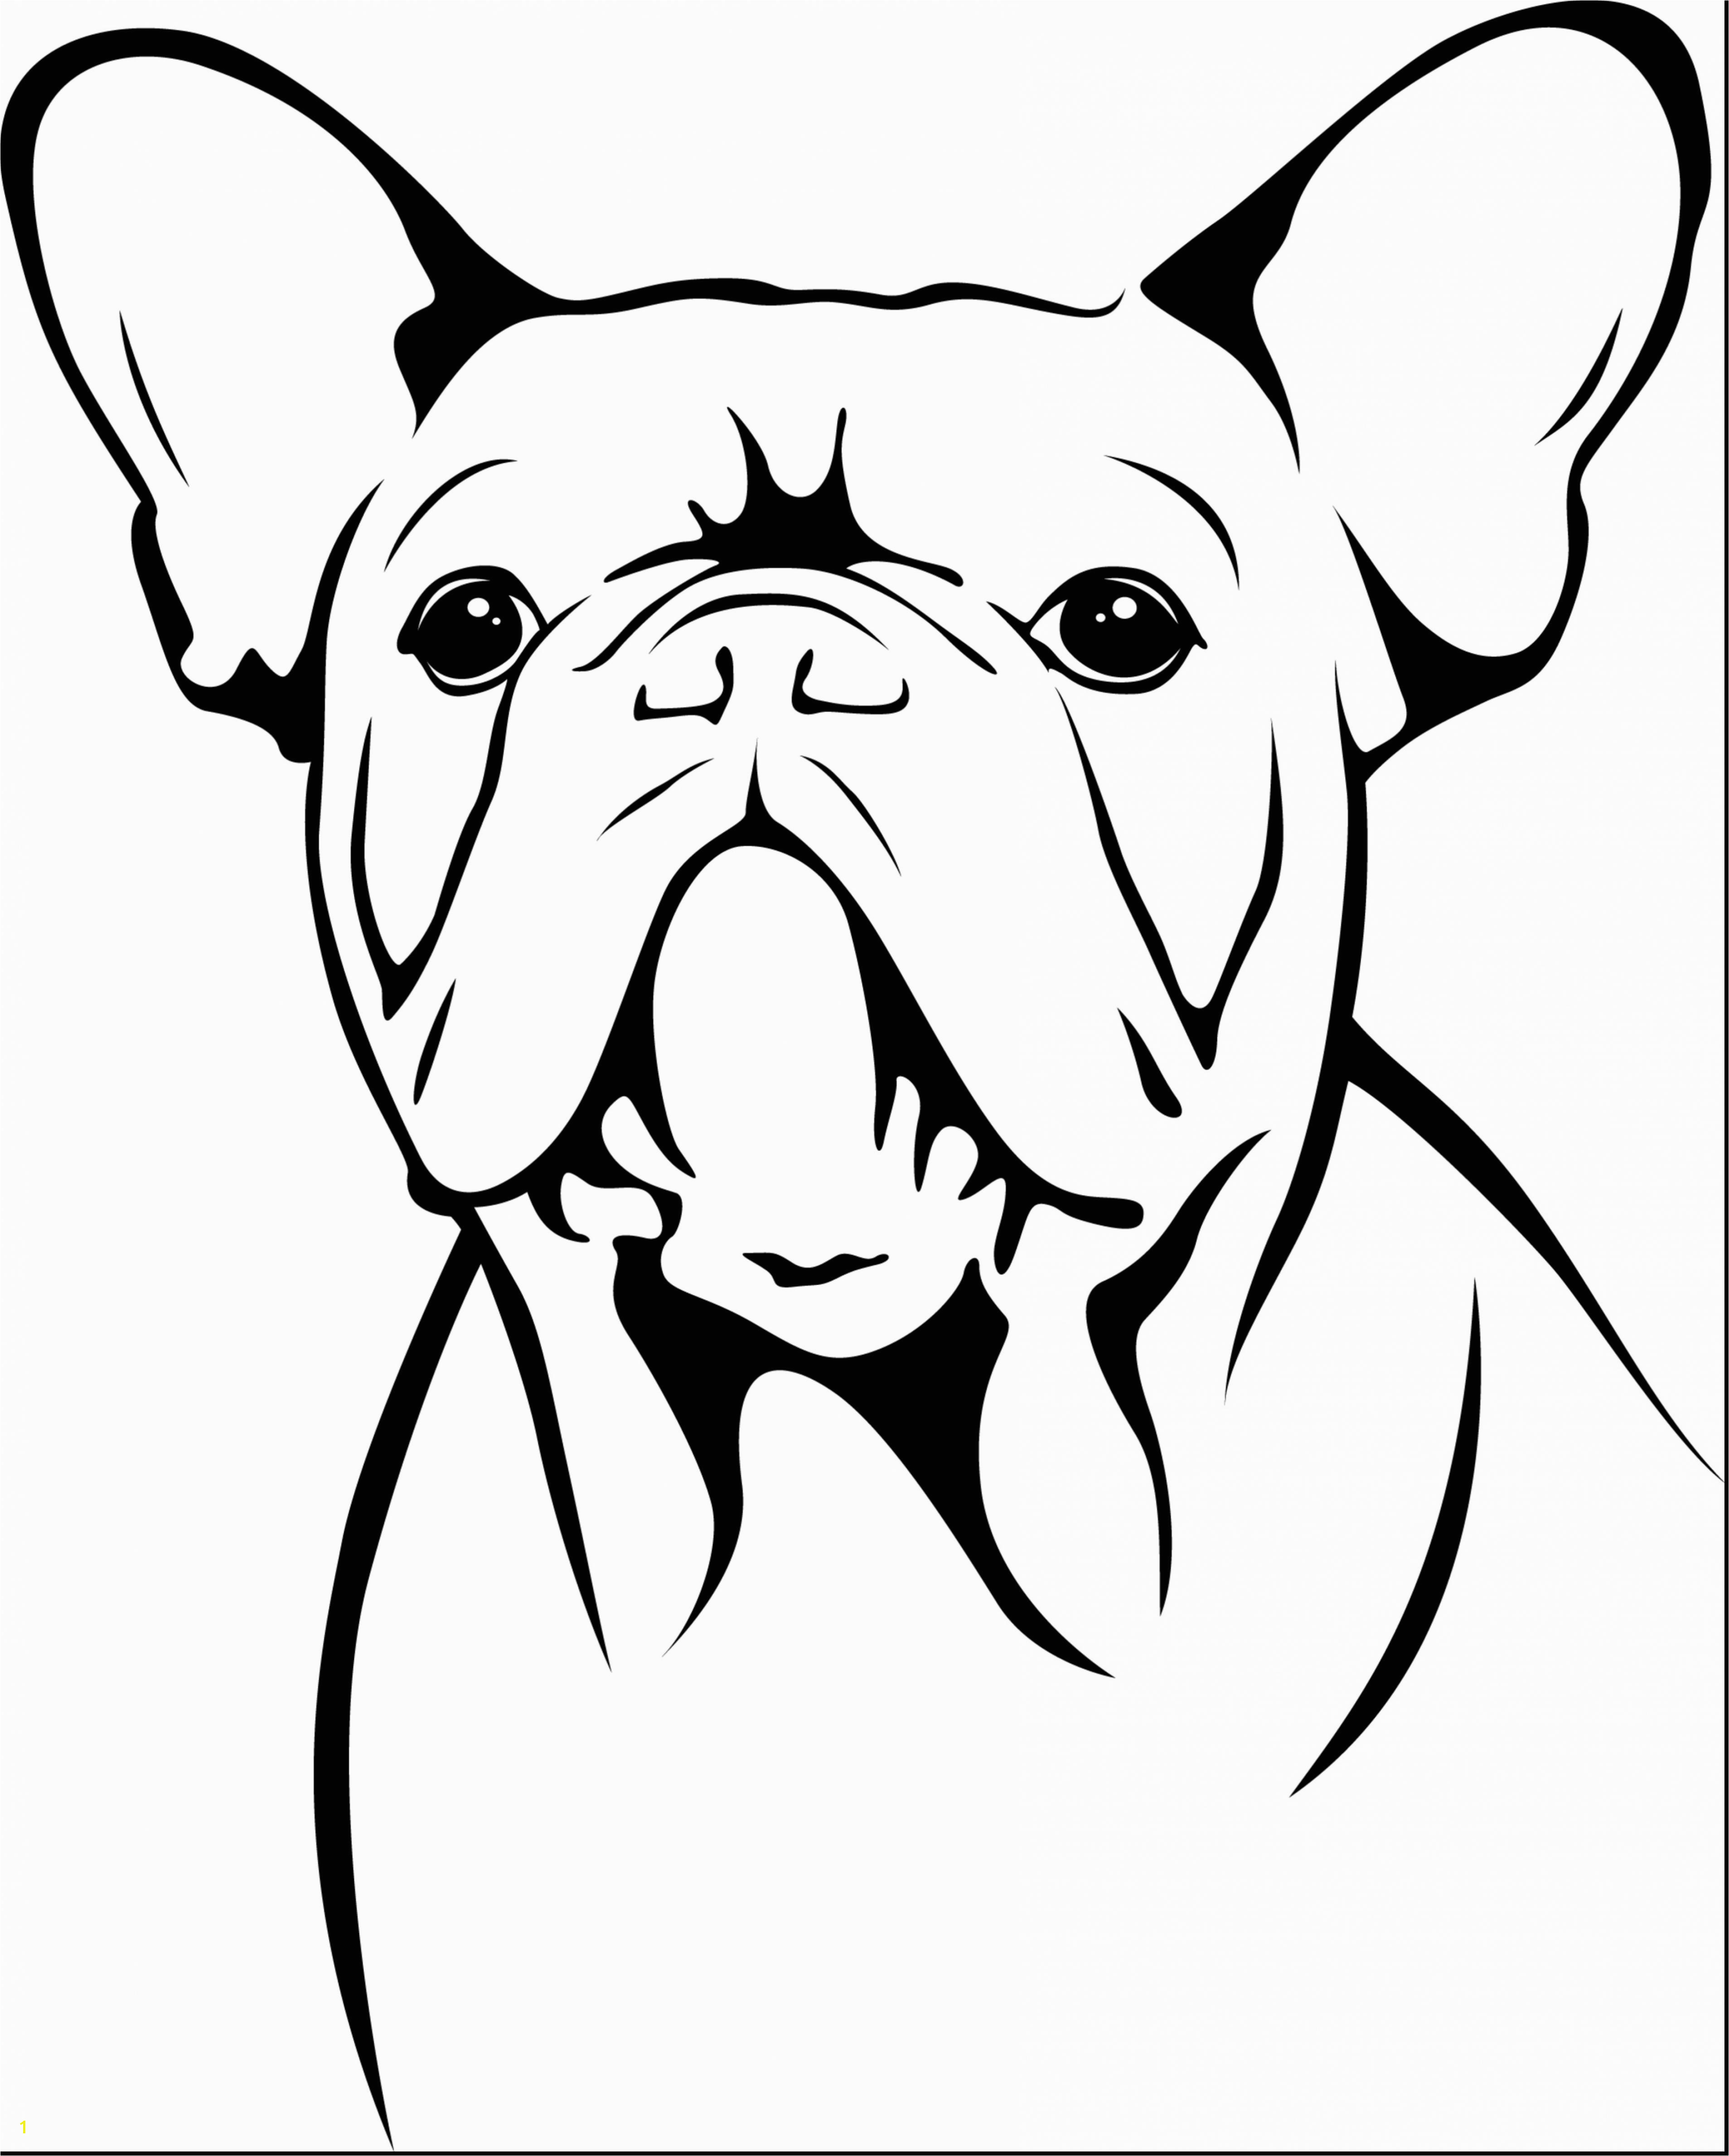 Bulldog Coloring Pages Yorkie Coloring Pages Lovely Bulldog Coloring Pages Beautiful Cool